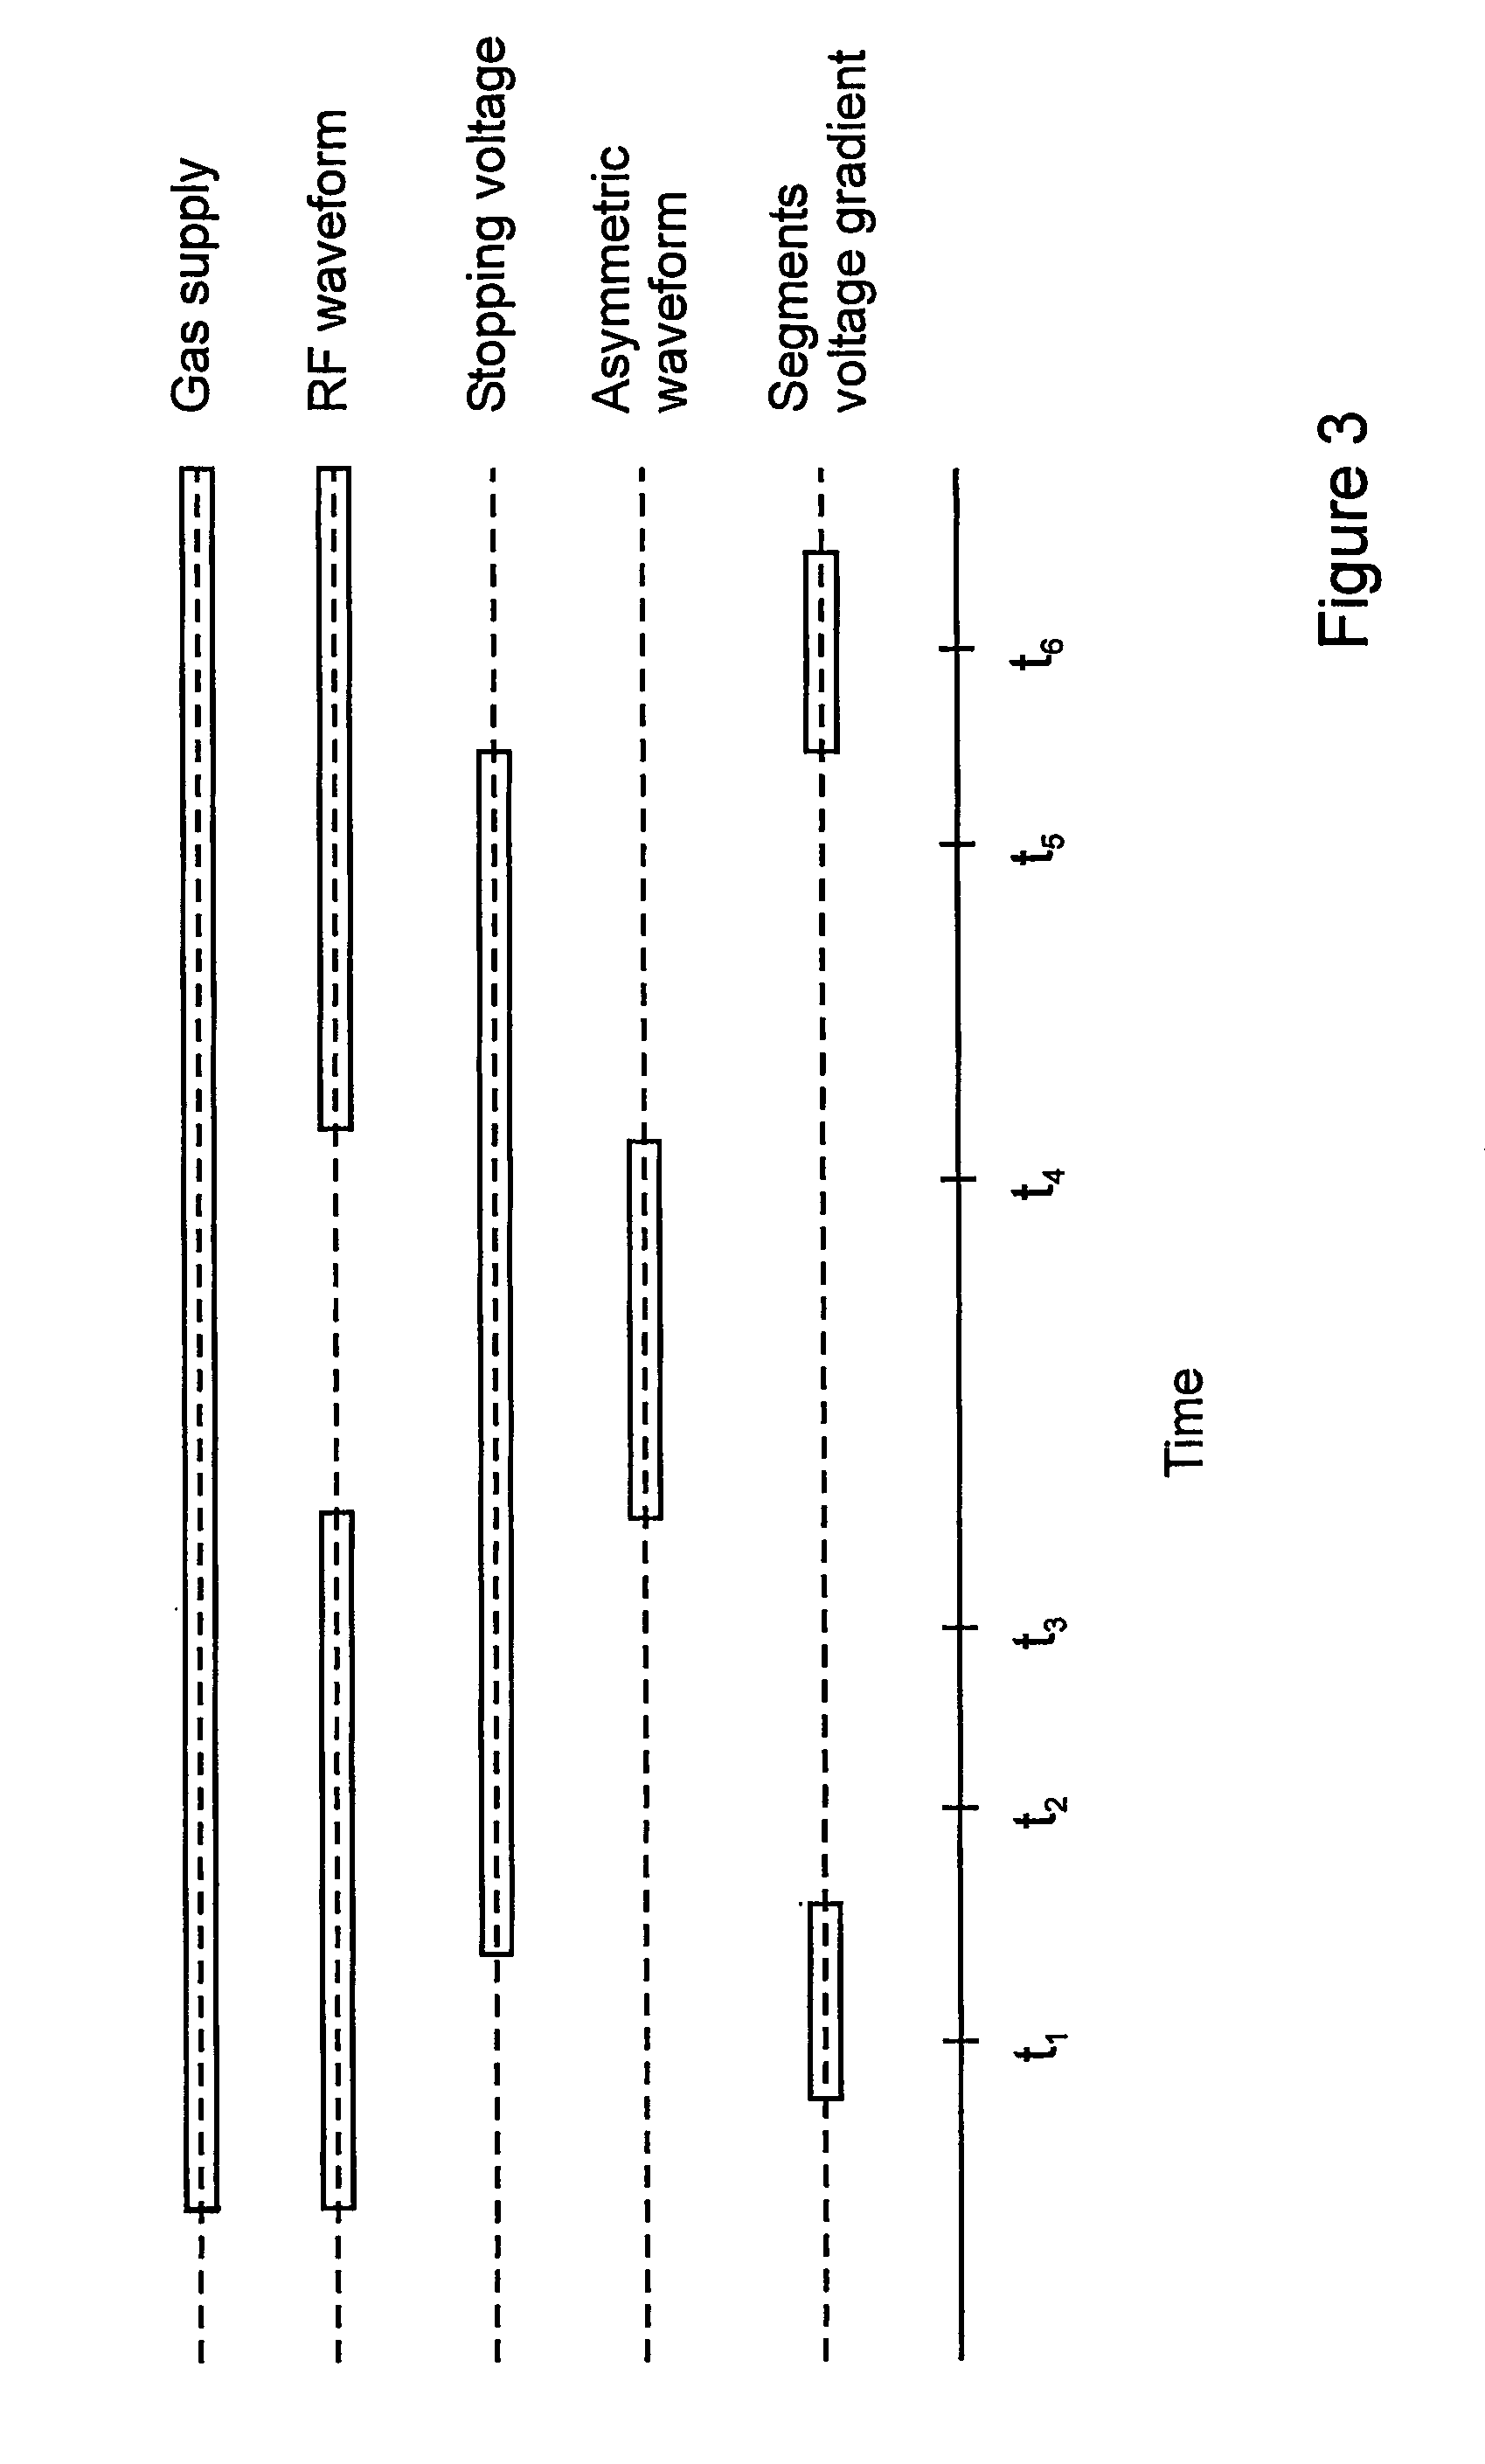 FAIMS apparatus and method for separating ions in the gas phase